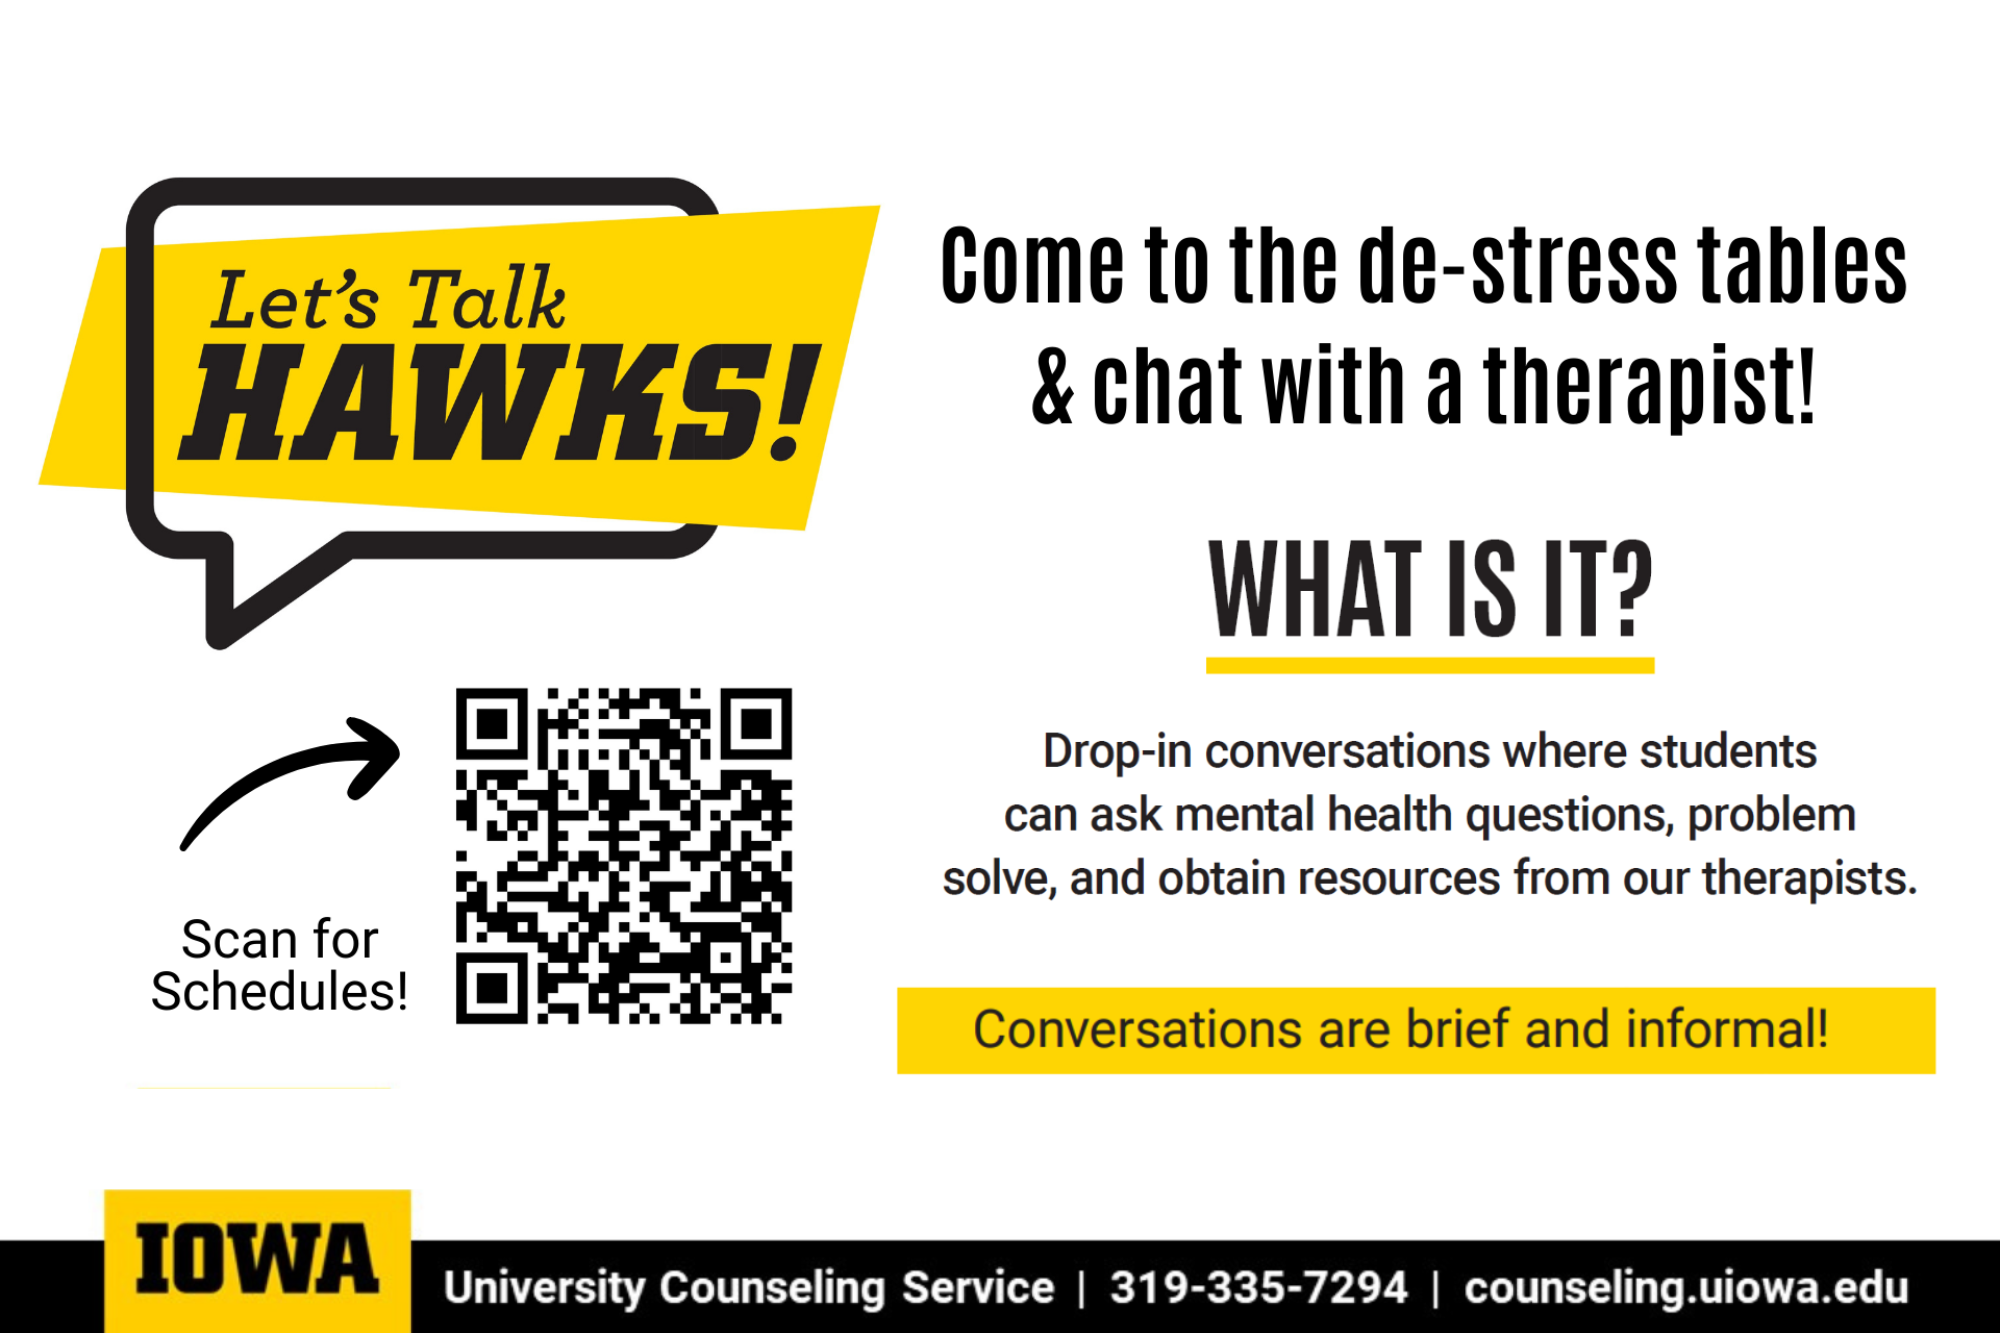 University Counseling Services